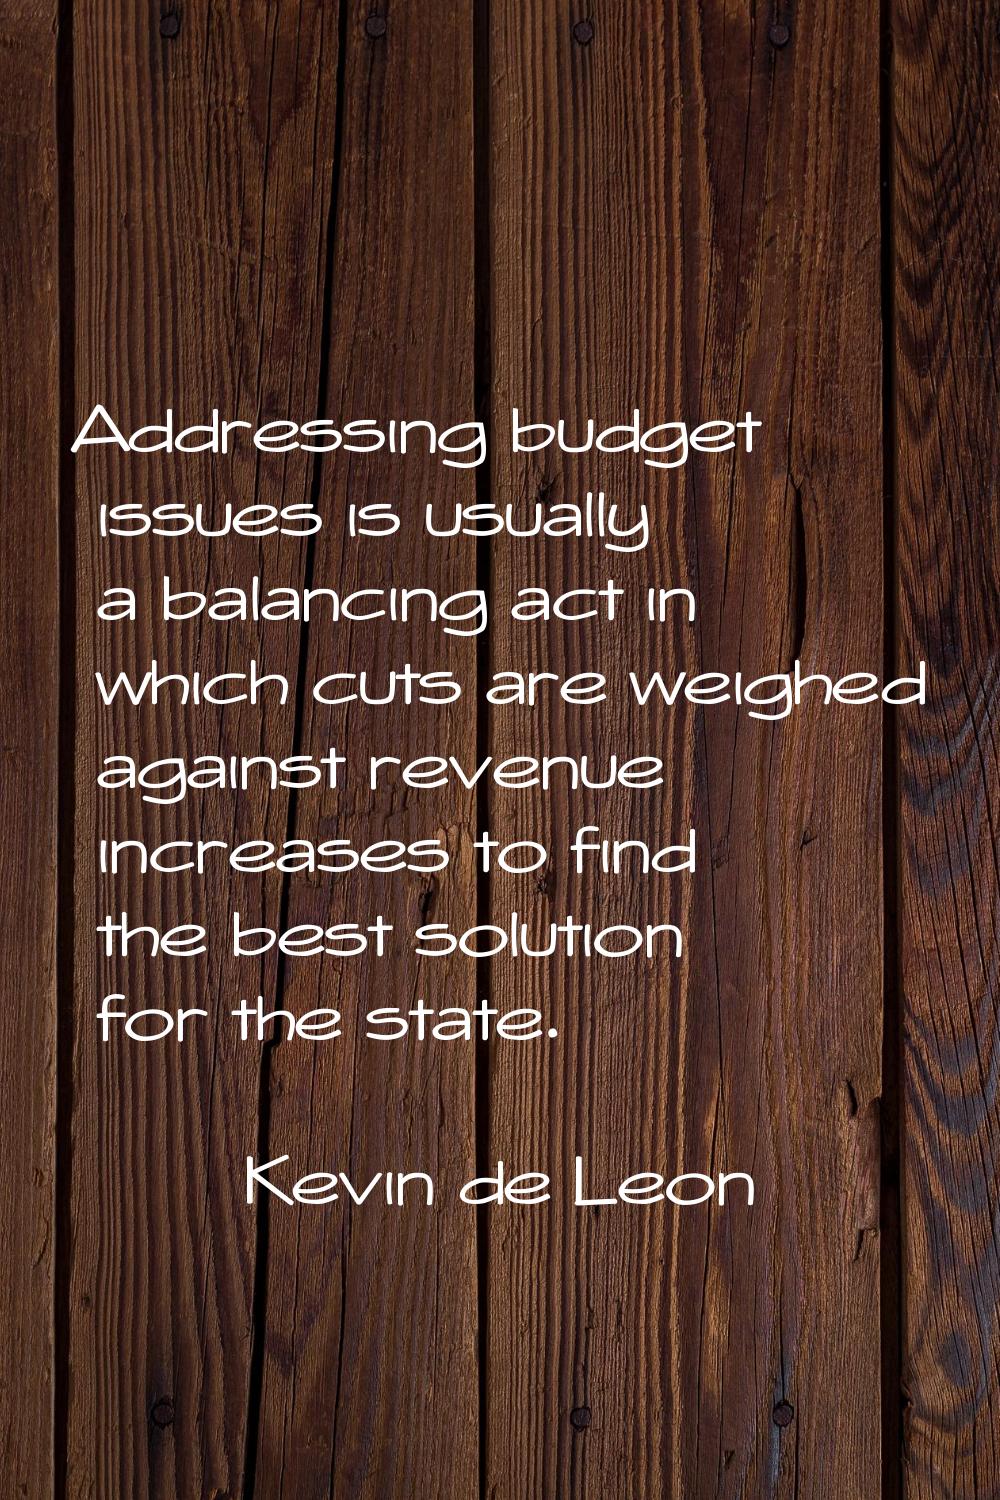 Addressing budget issues is usually a balancing act in which cuts are weighed against revenue incre